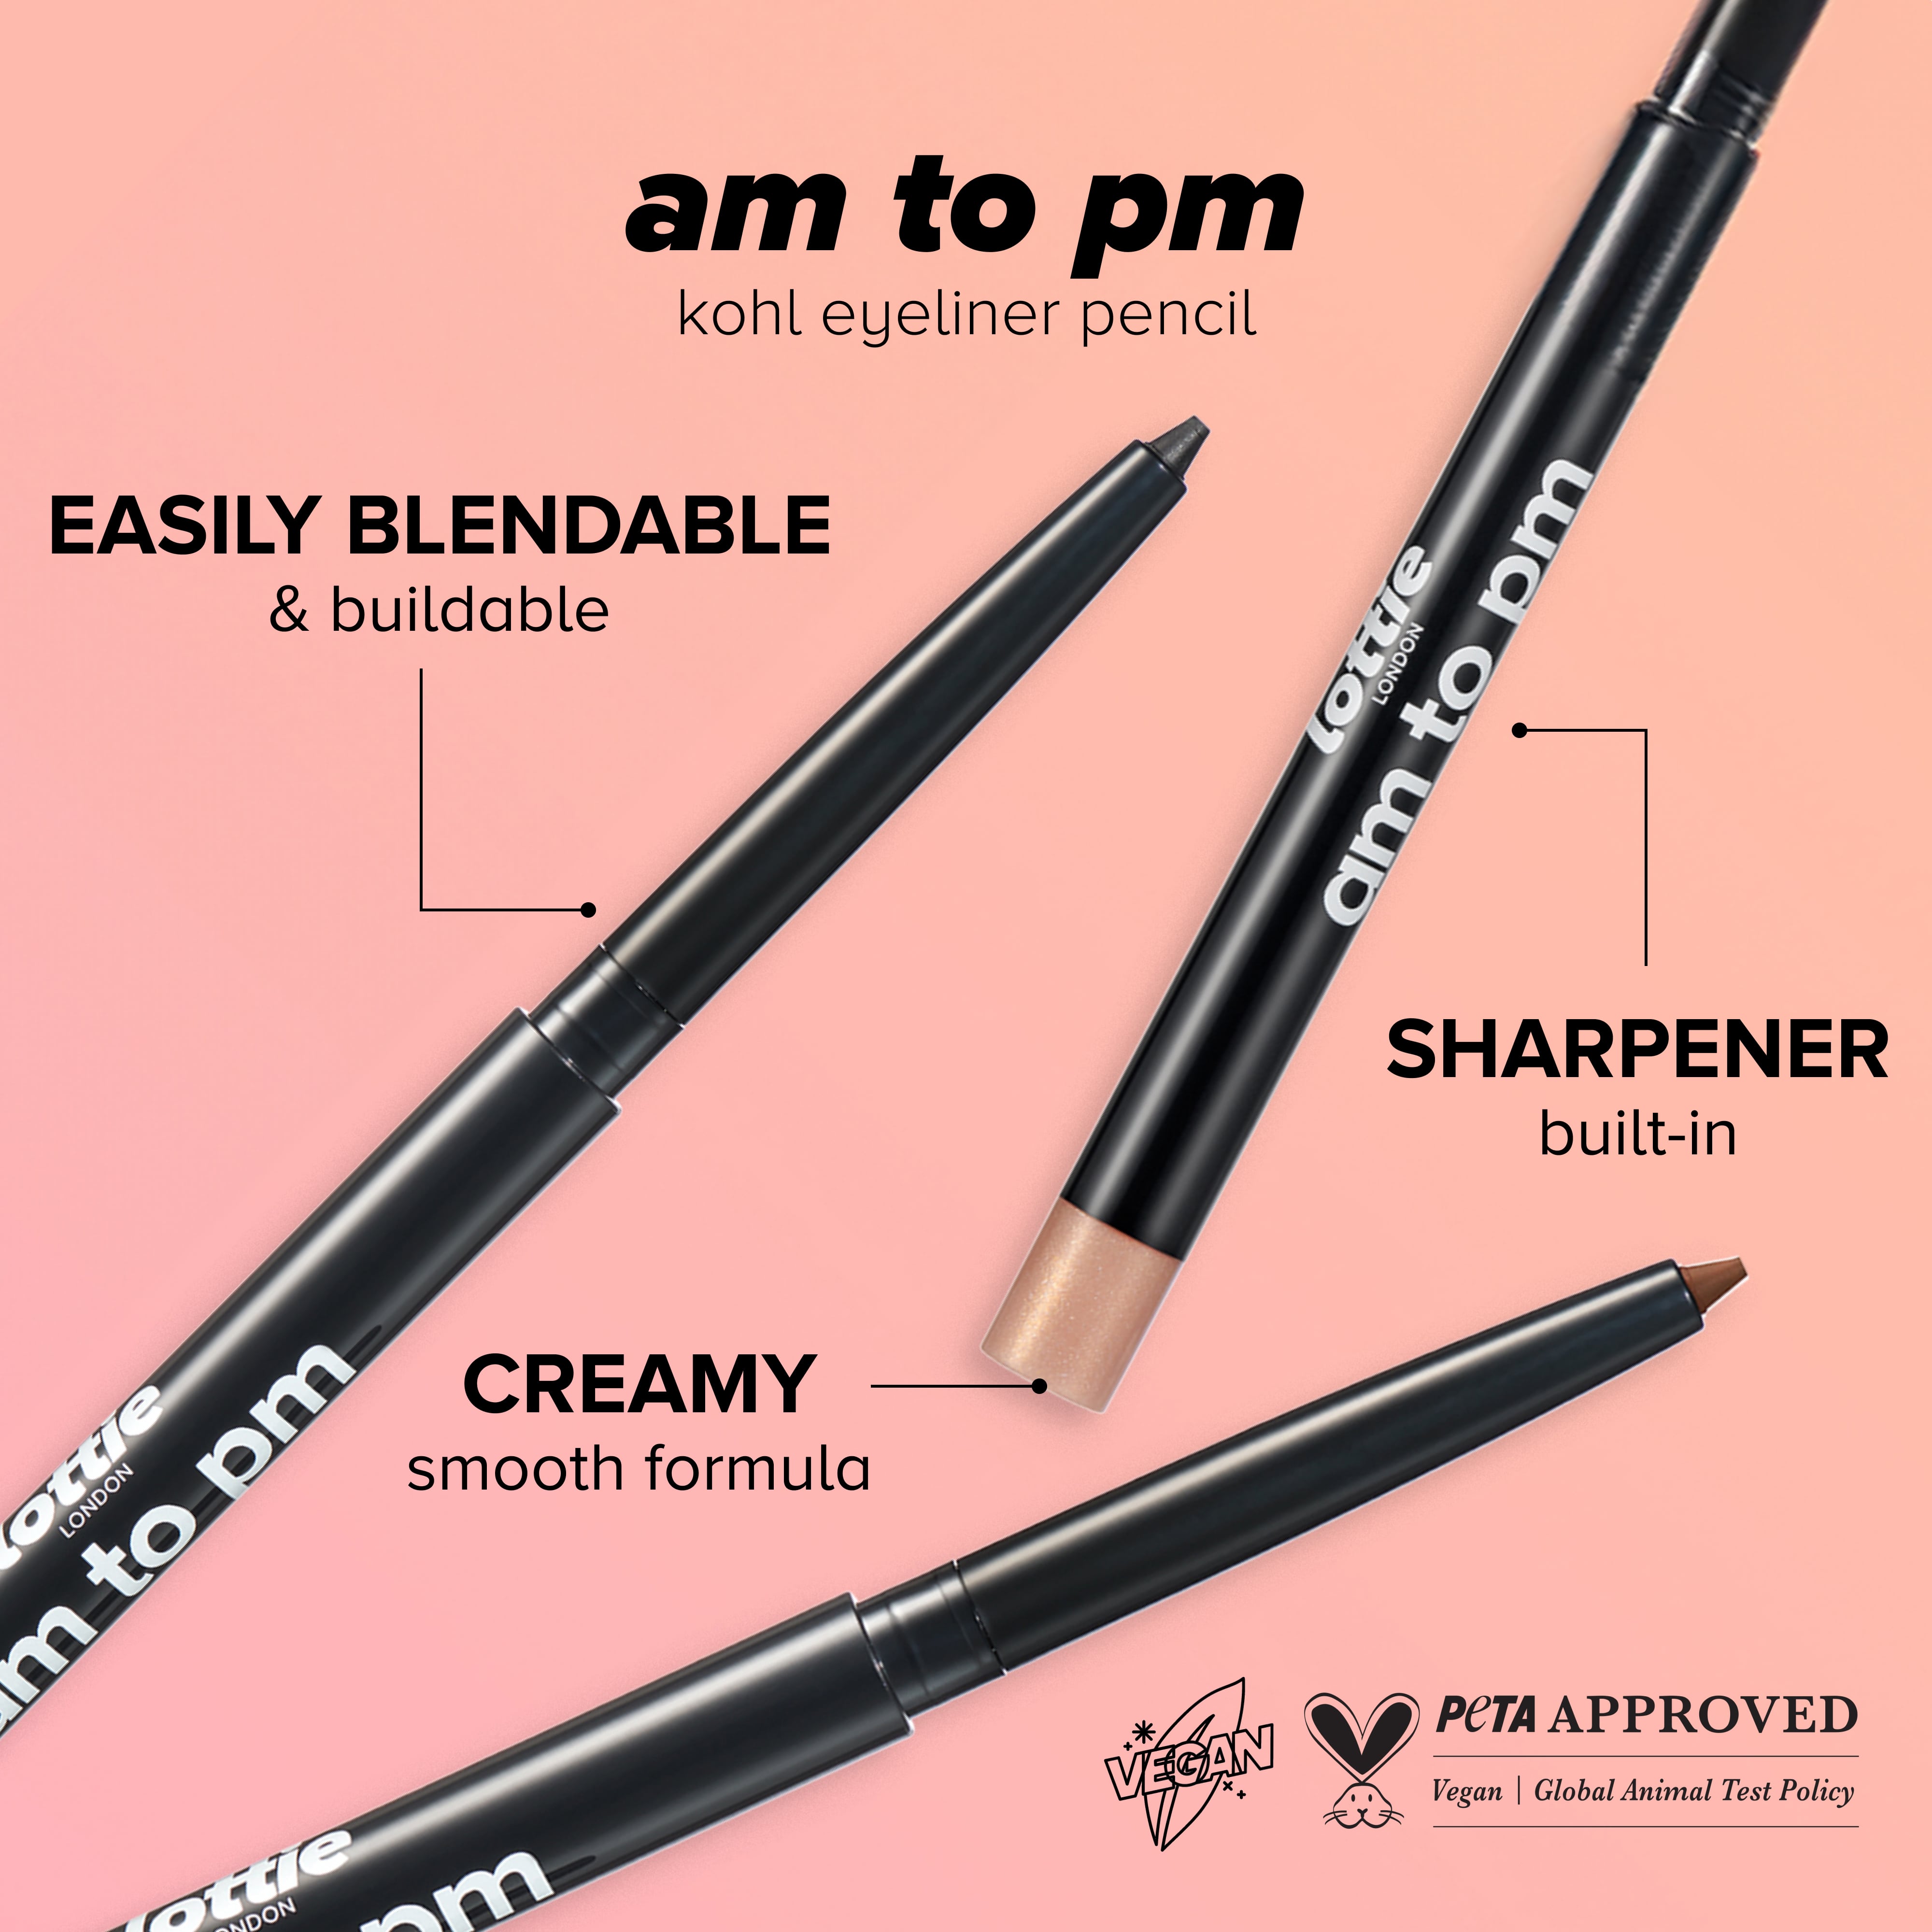 am to pm retractable eyeliner